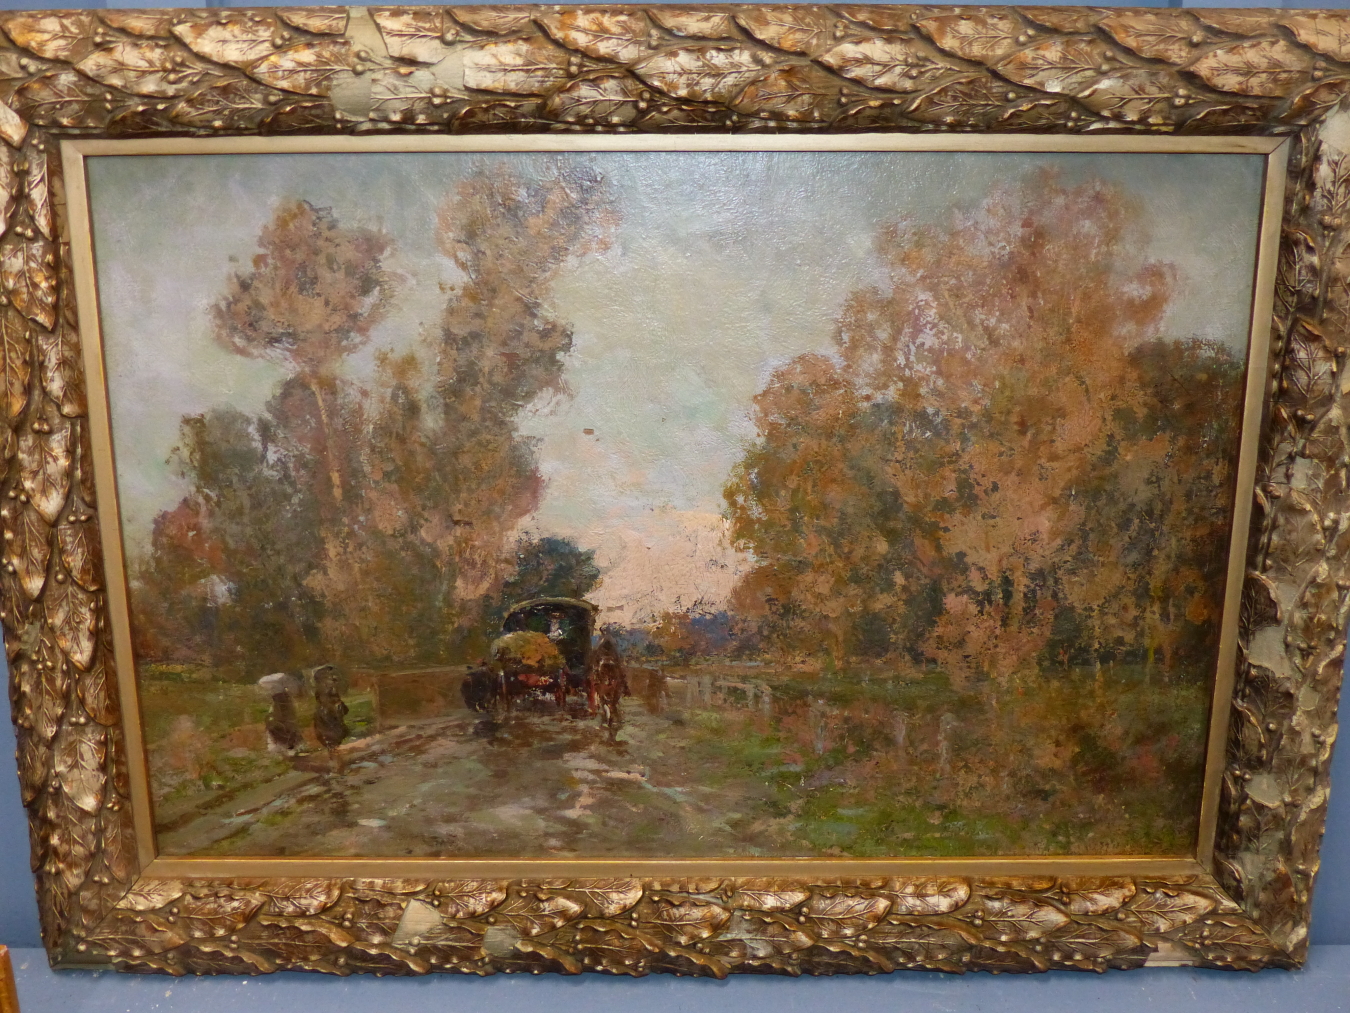 IMPRESSIONIST SCHOOL (LATE 19TH CENTURY), HORSE DRAWN CARRIAGE AND FIGURES ON A TREE LINED ROAD, - Image 2 of 7